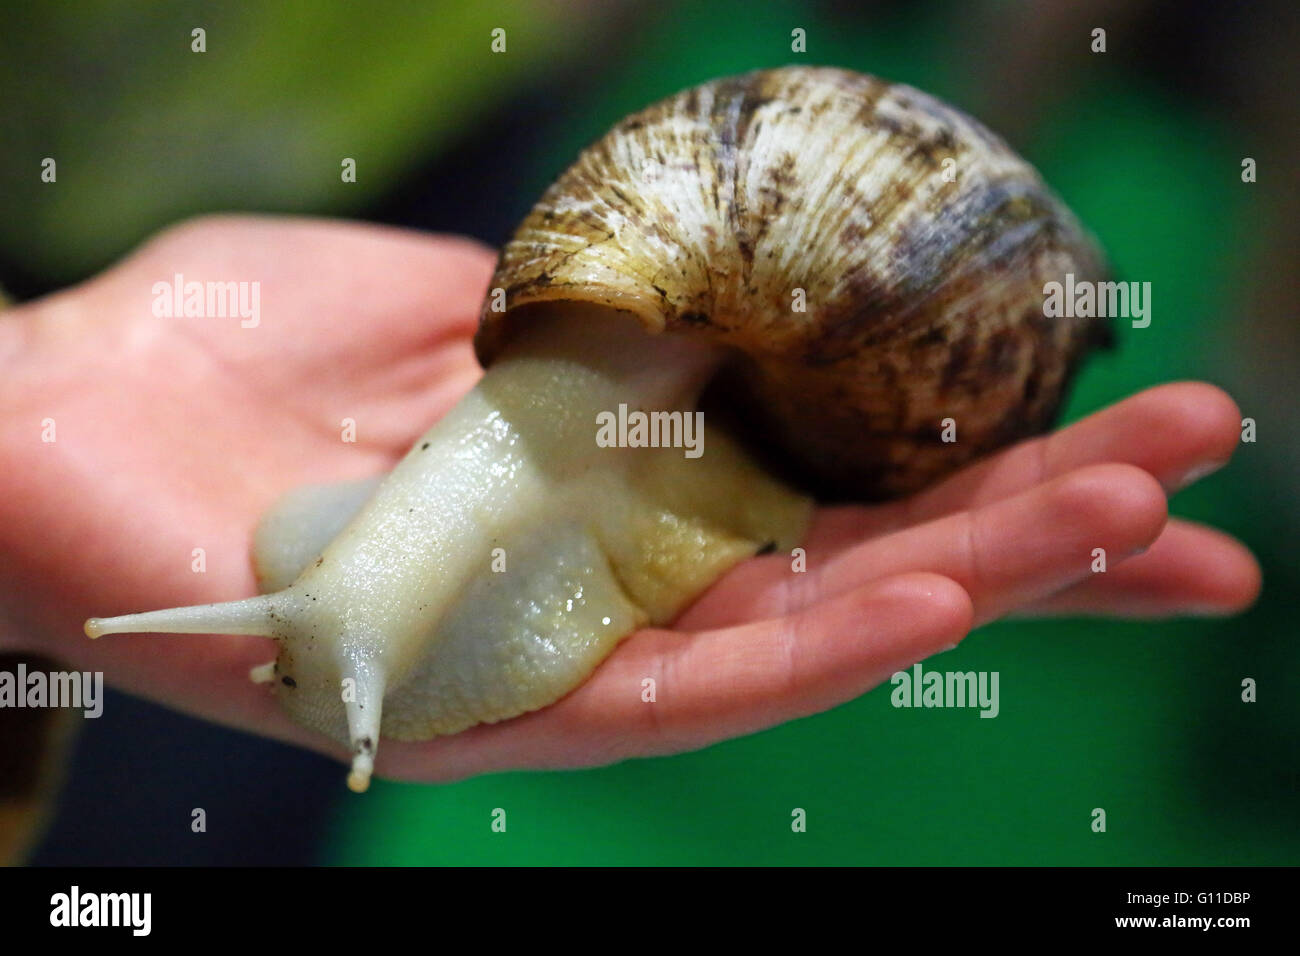 Are there giant snails in the UK?